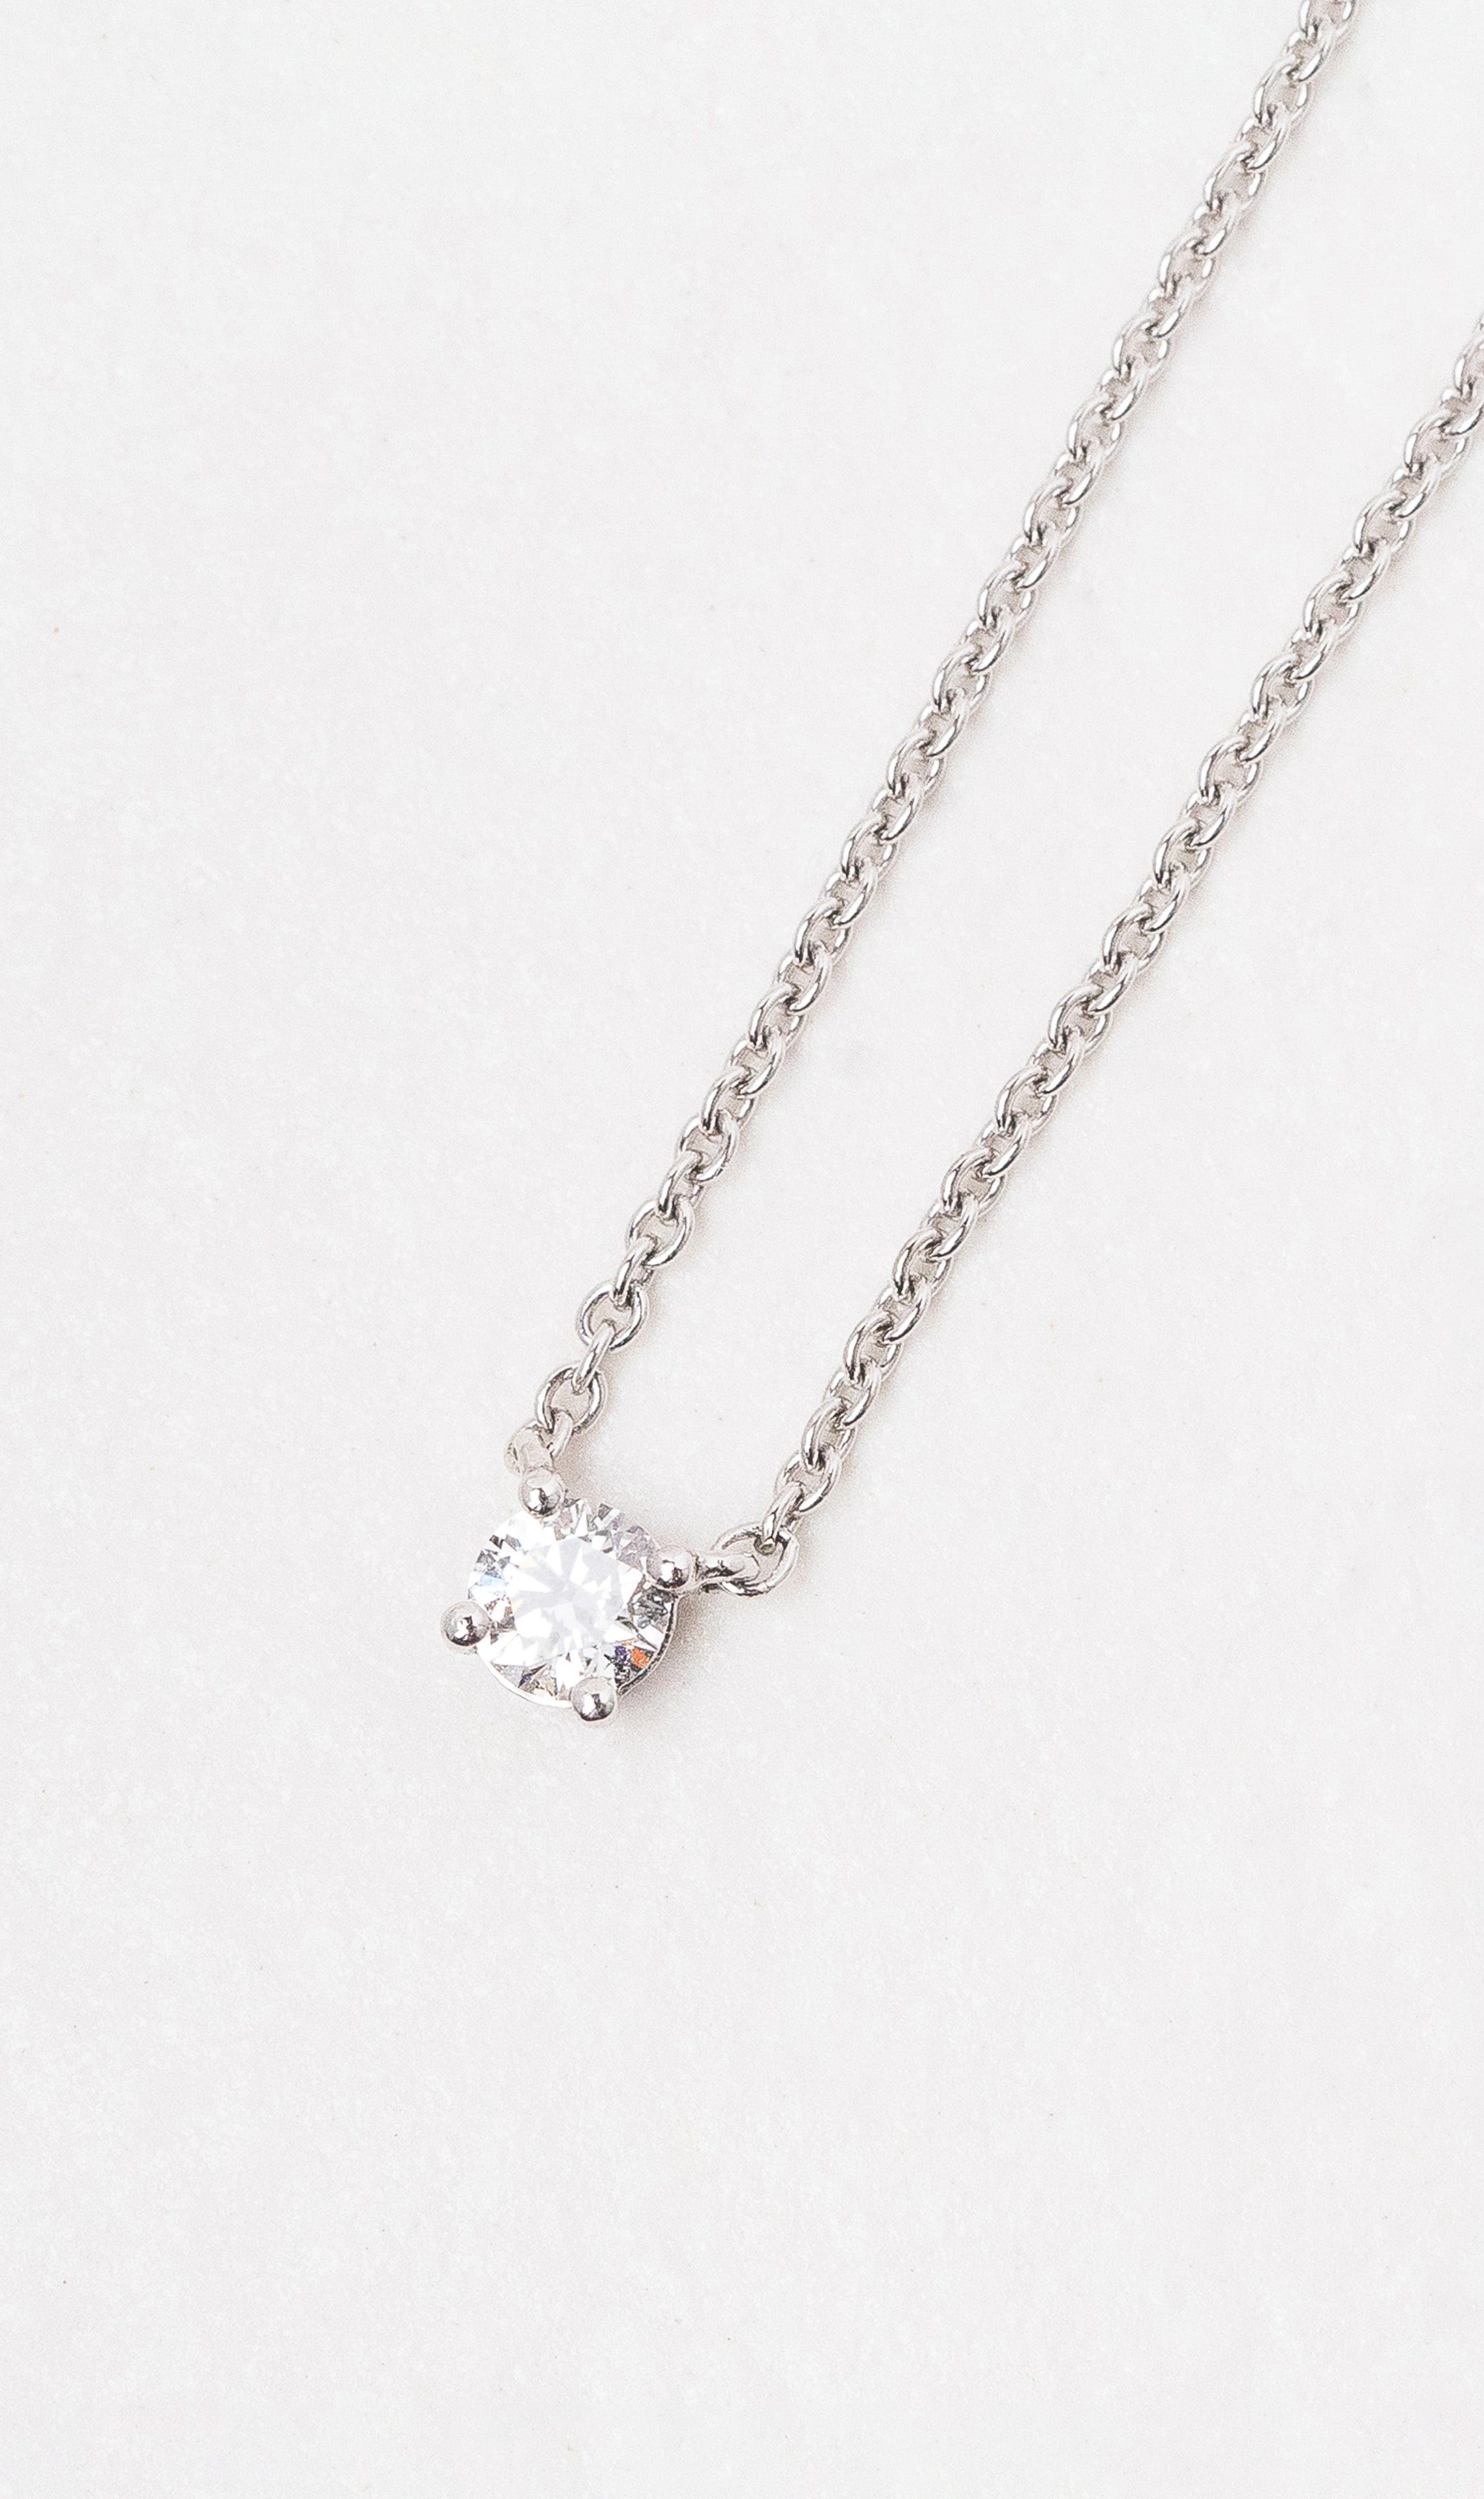 Hogans Family Jewellers 18K WG Solitaire Diamond Necklace